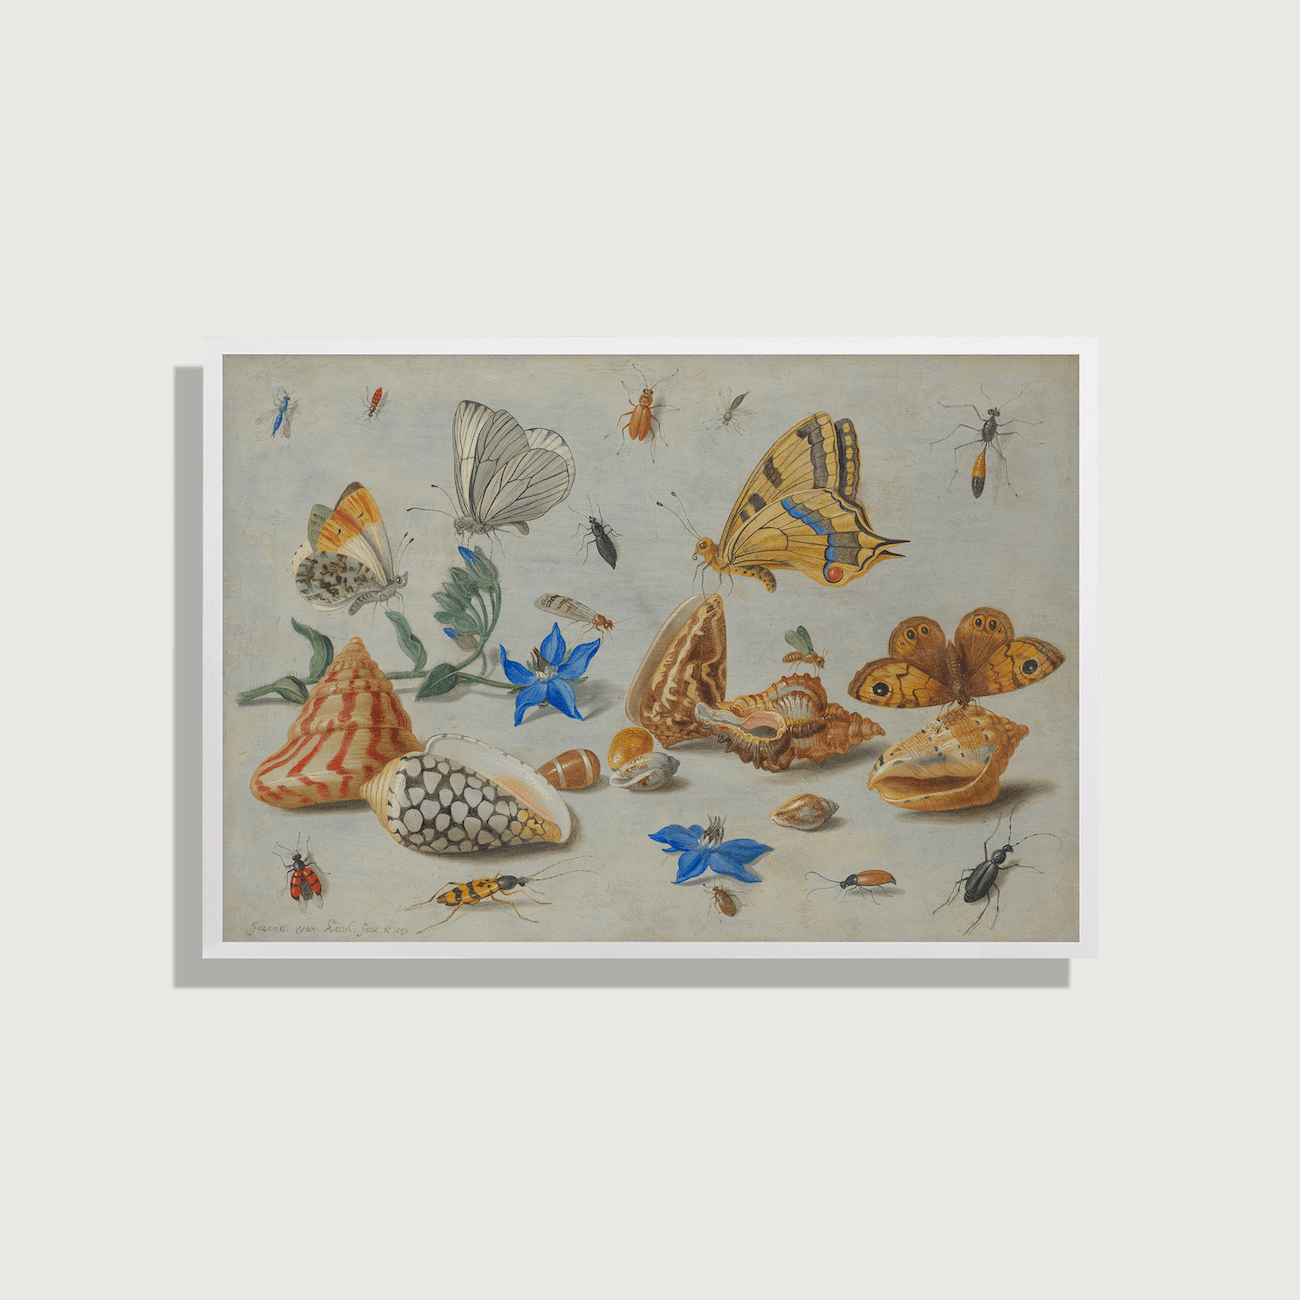 Jan van Kessel - Study of Insects, Flowers and Shells, 1659 - On Paper